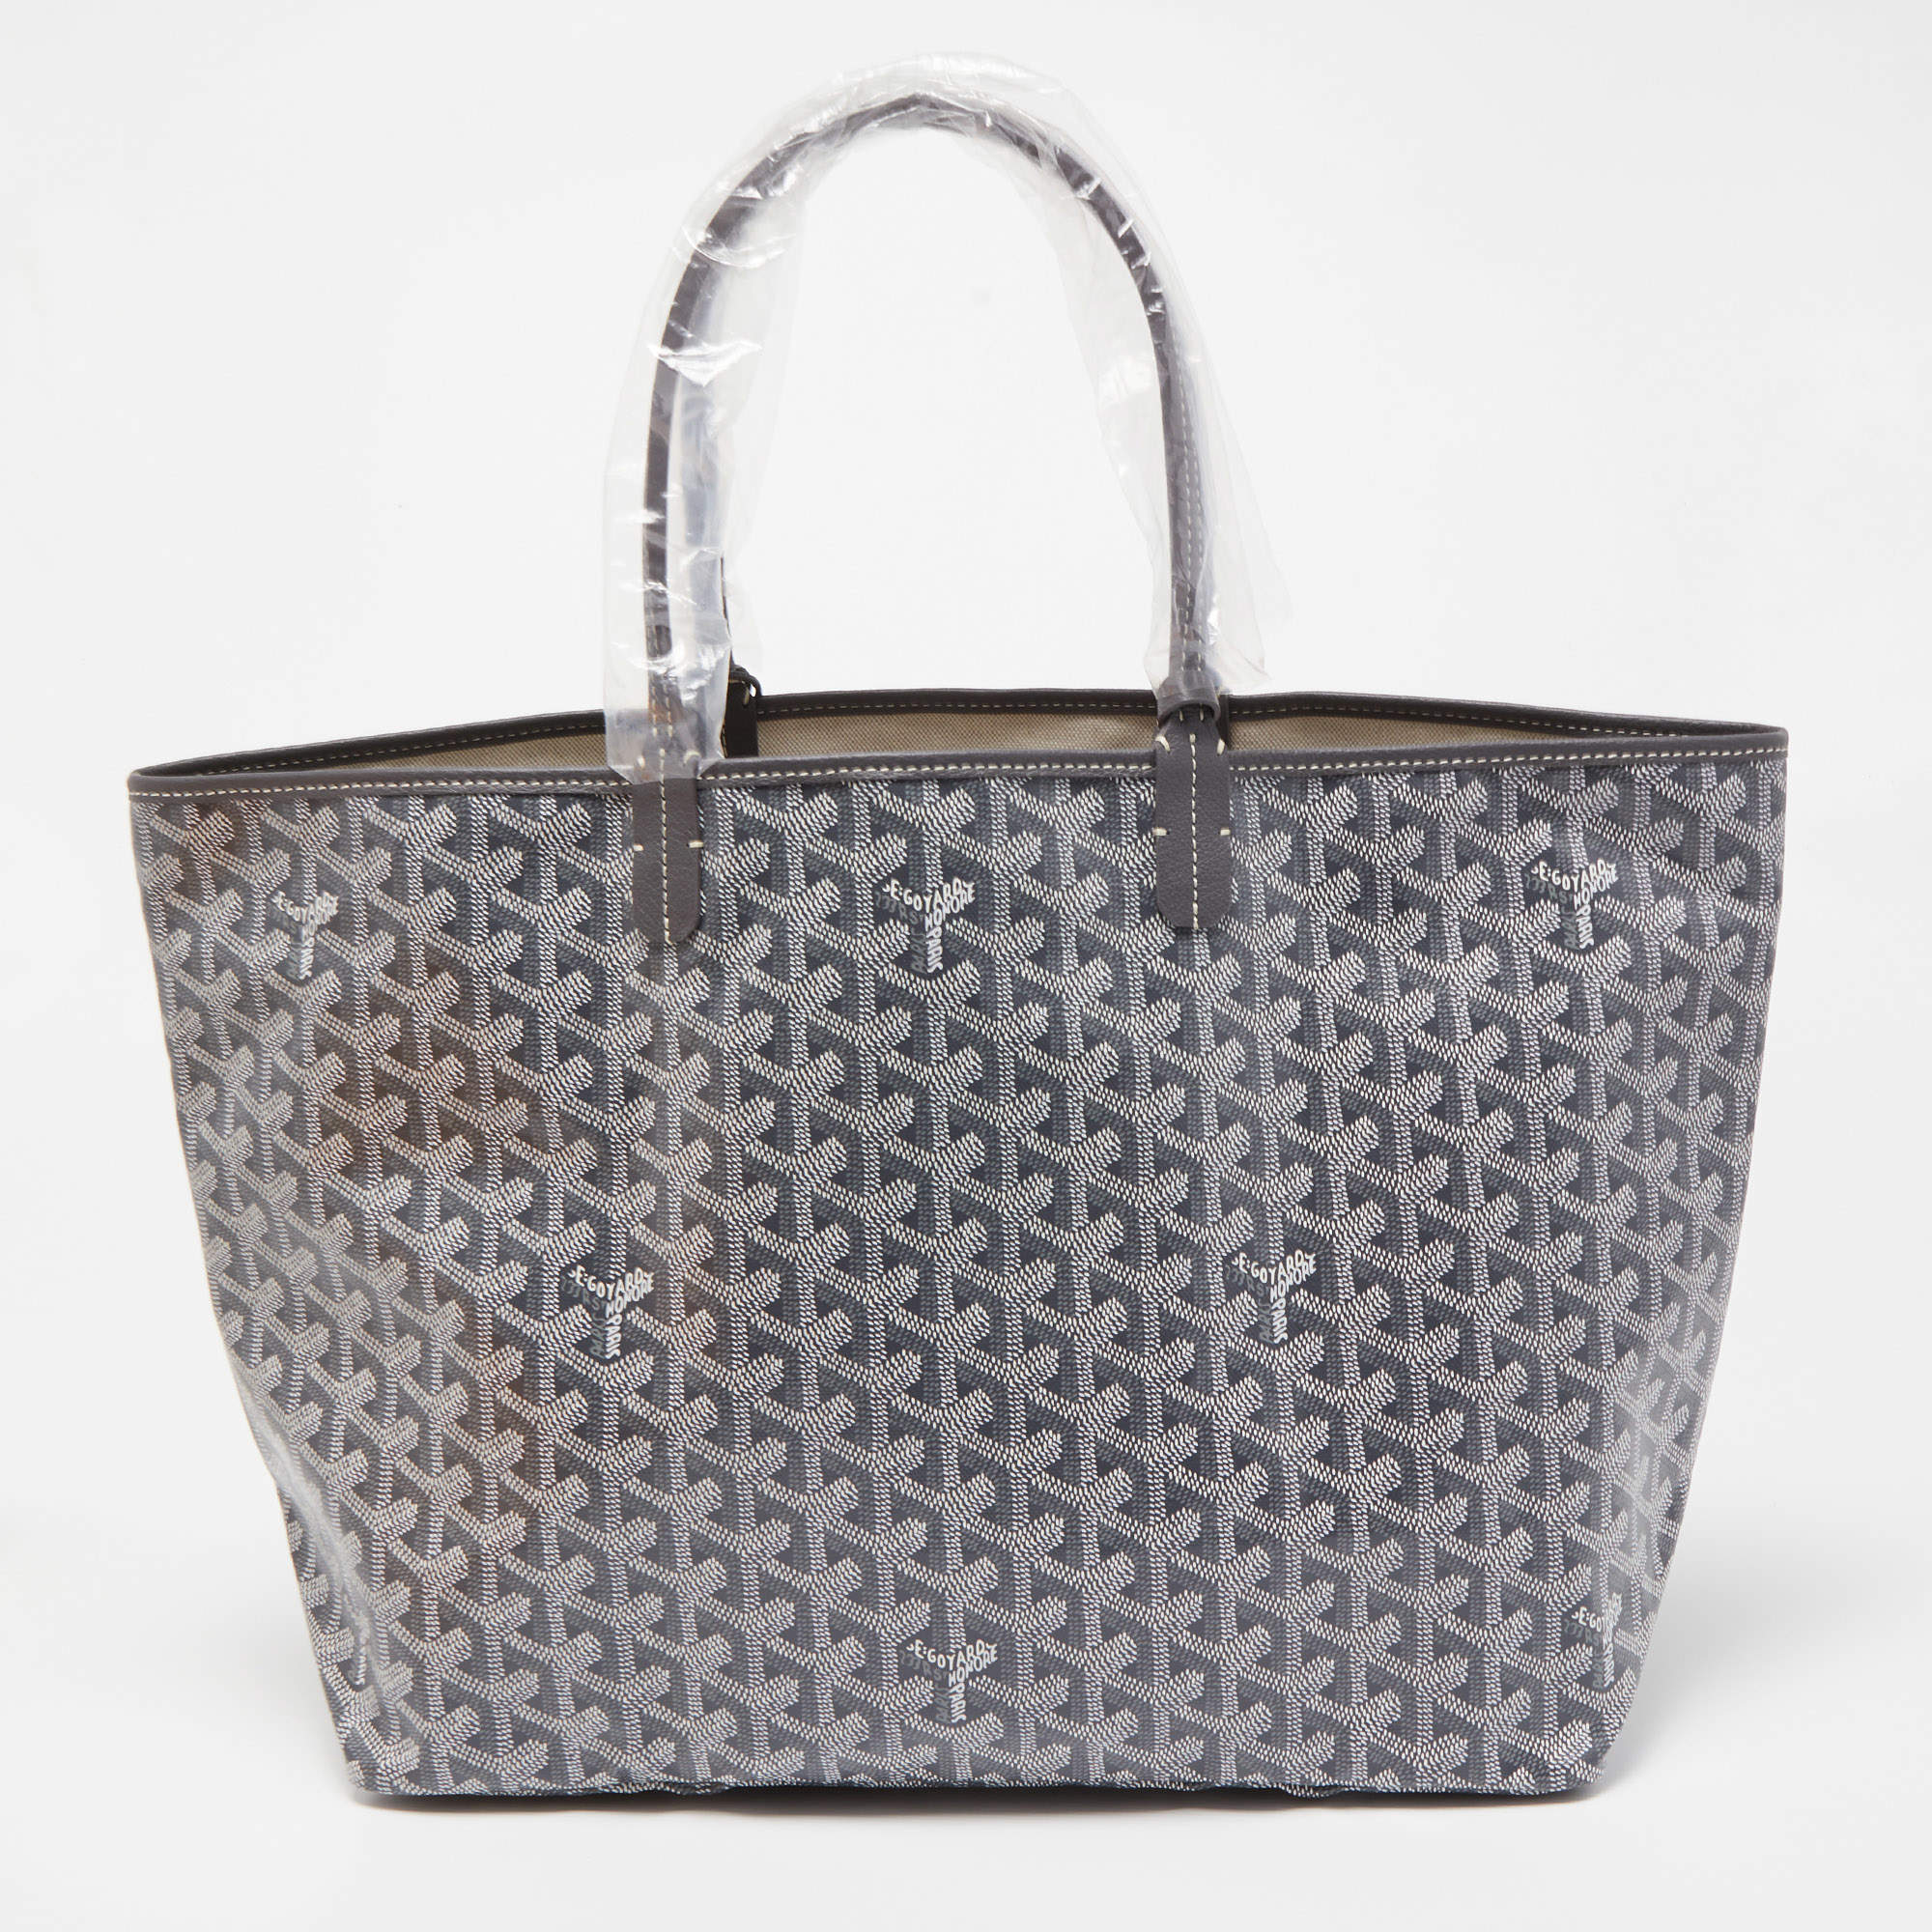 Goyard St. Louis PM Tote Black with Brown Trim, New in Dustbag